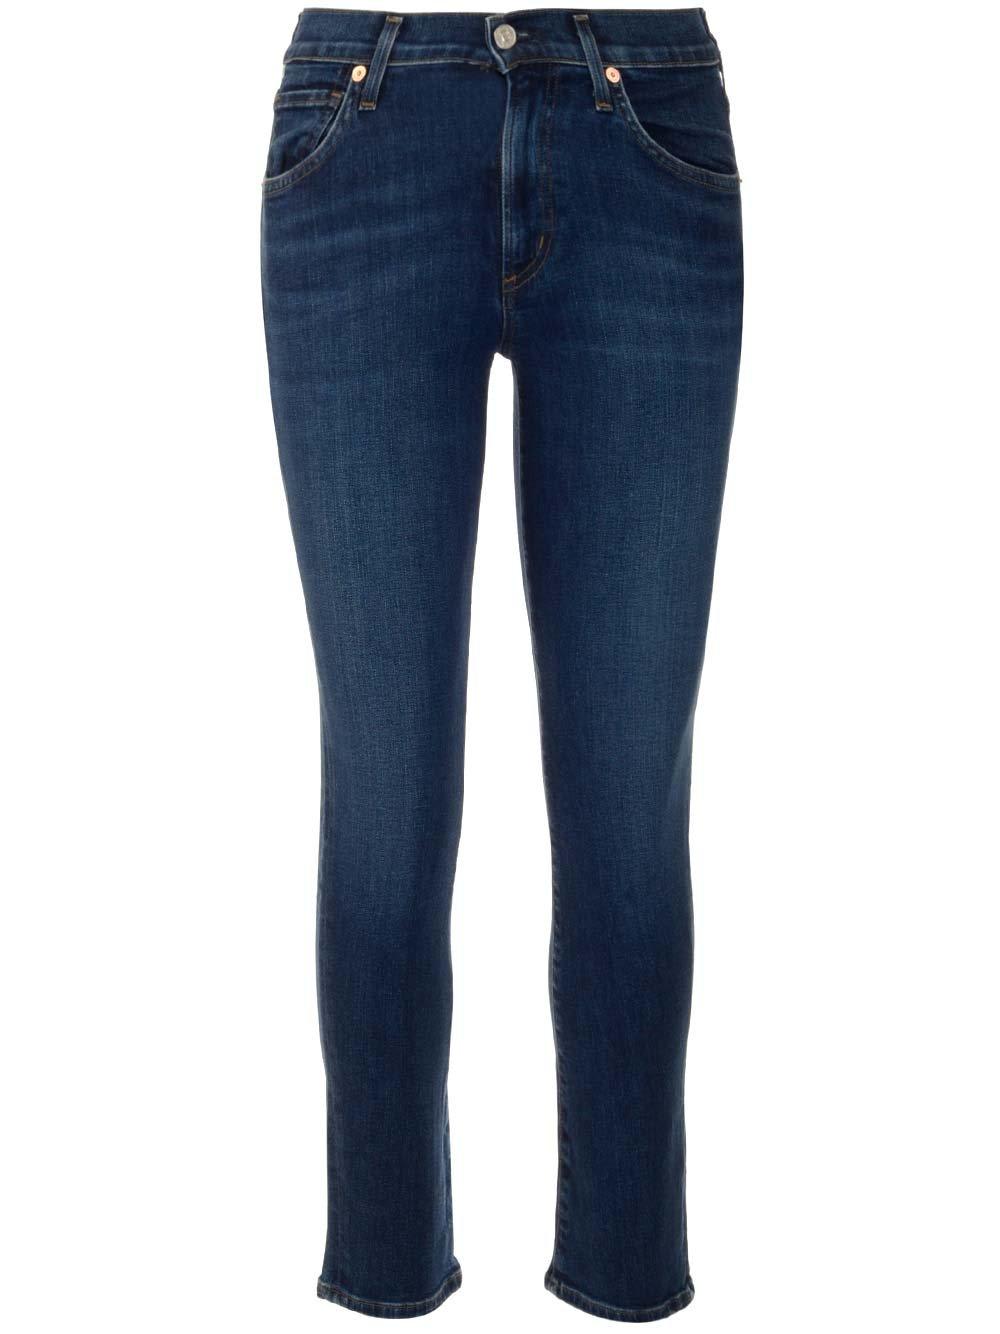 Citizens of Humanity Skyla Slim Fit Jeans